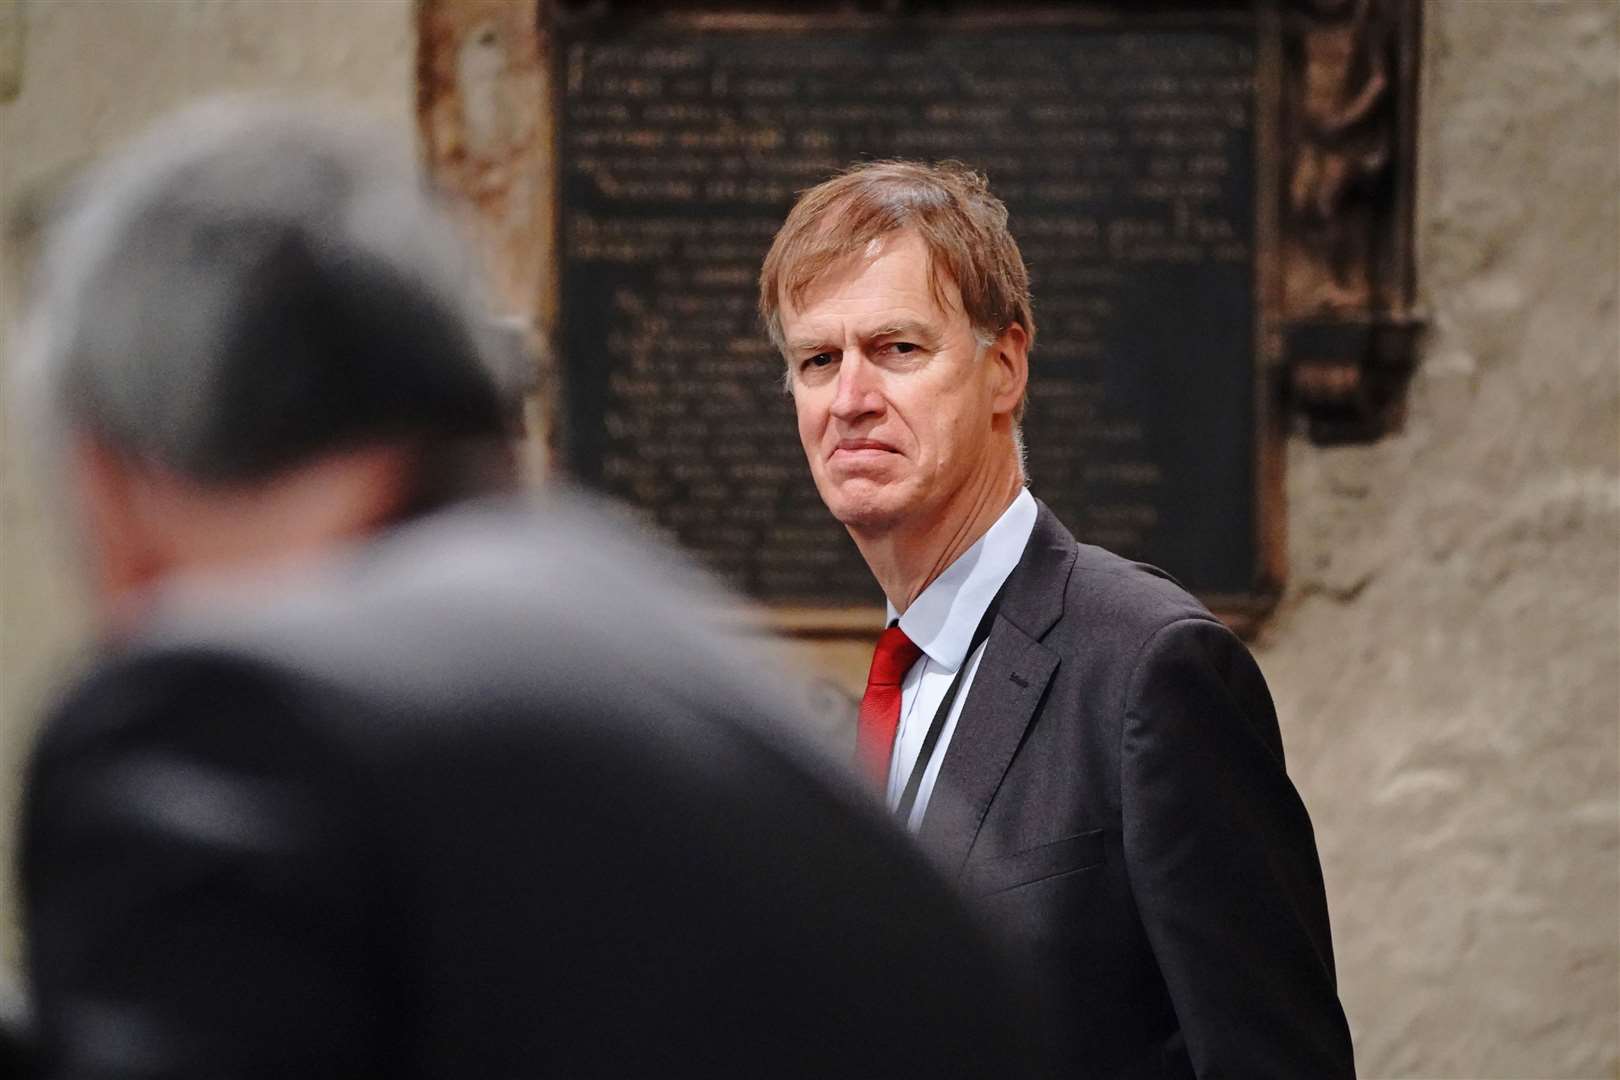 Sir Stephen Timms warned that proposed reforms will make ‘things very difficult for a significant number of people’ (Jonathan Brady/PA)